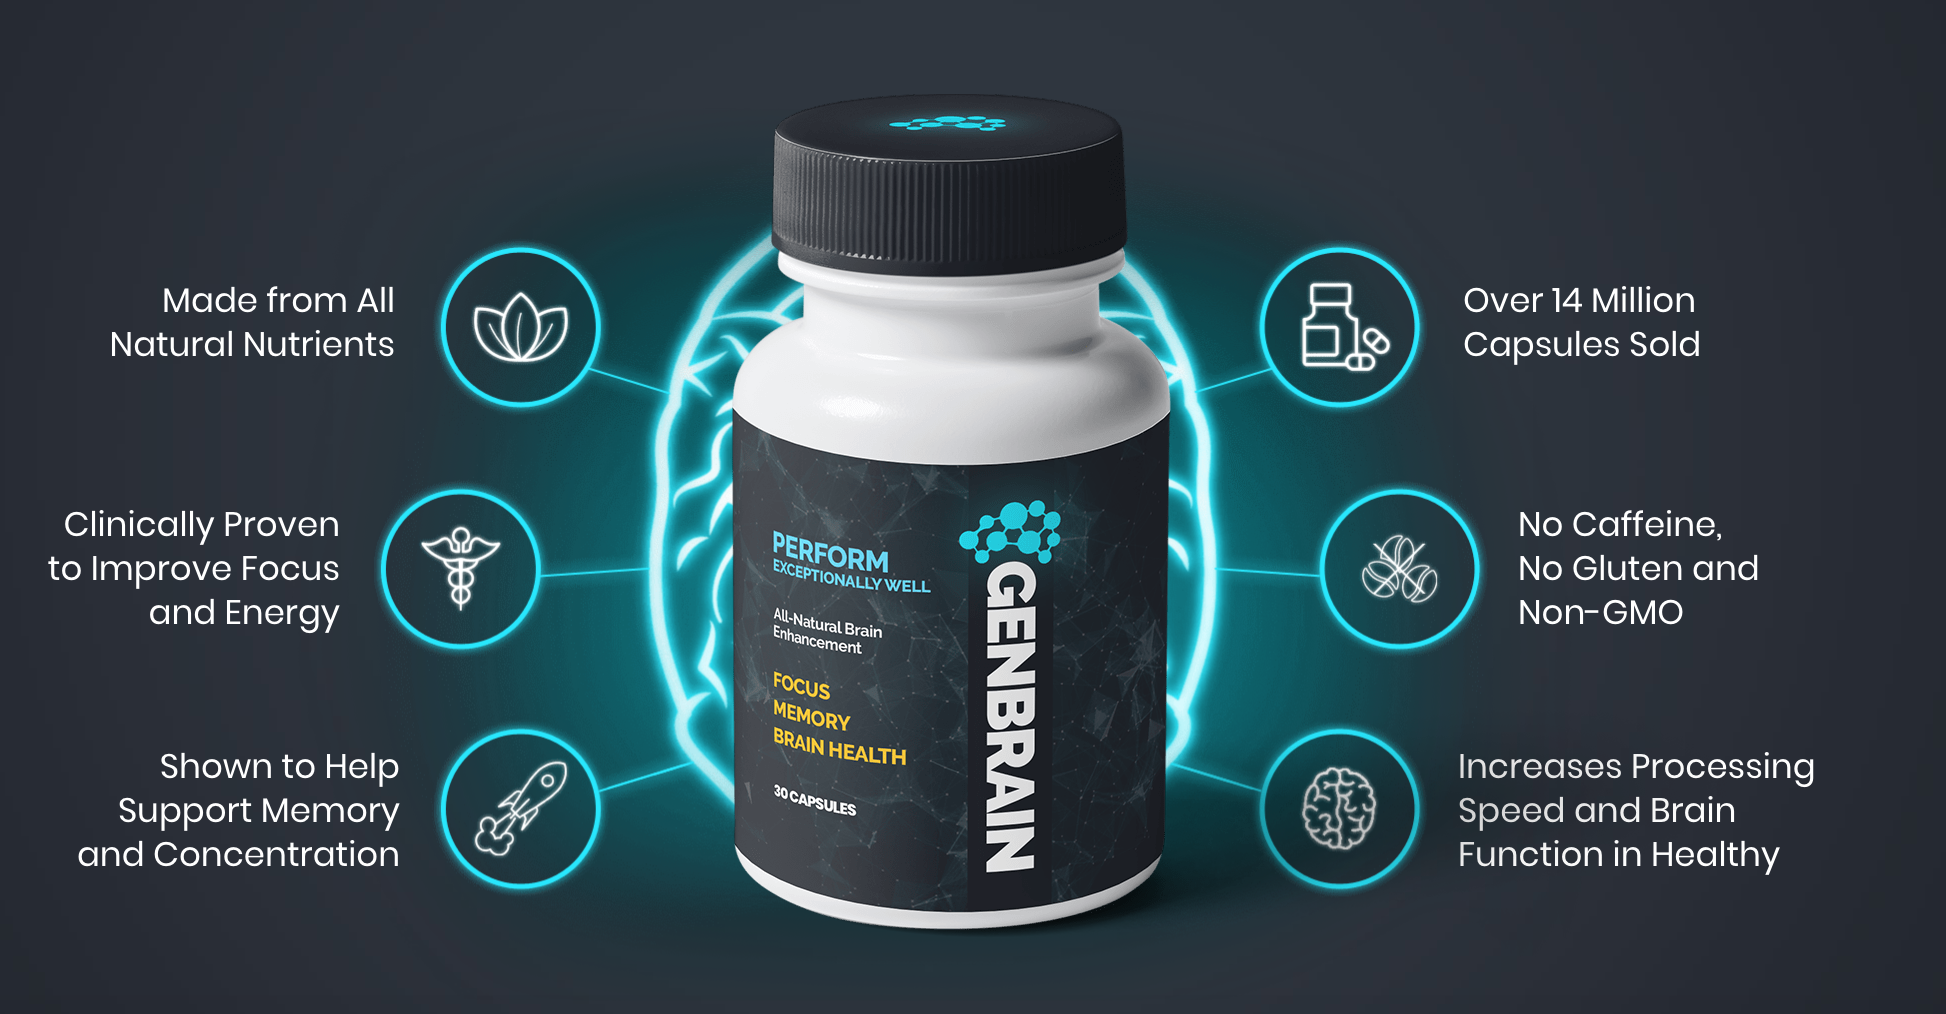 GenBrain Honest Review - Does It Work As Advertised? (2021 Results)